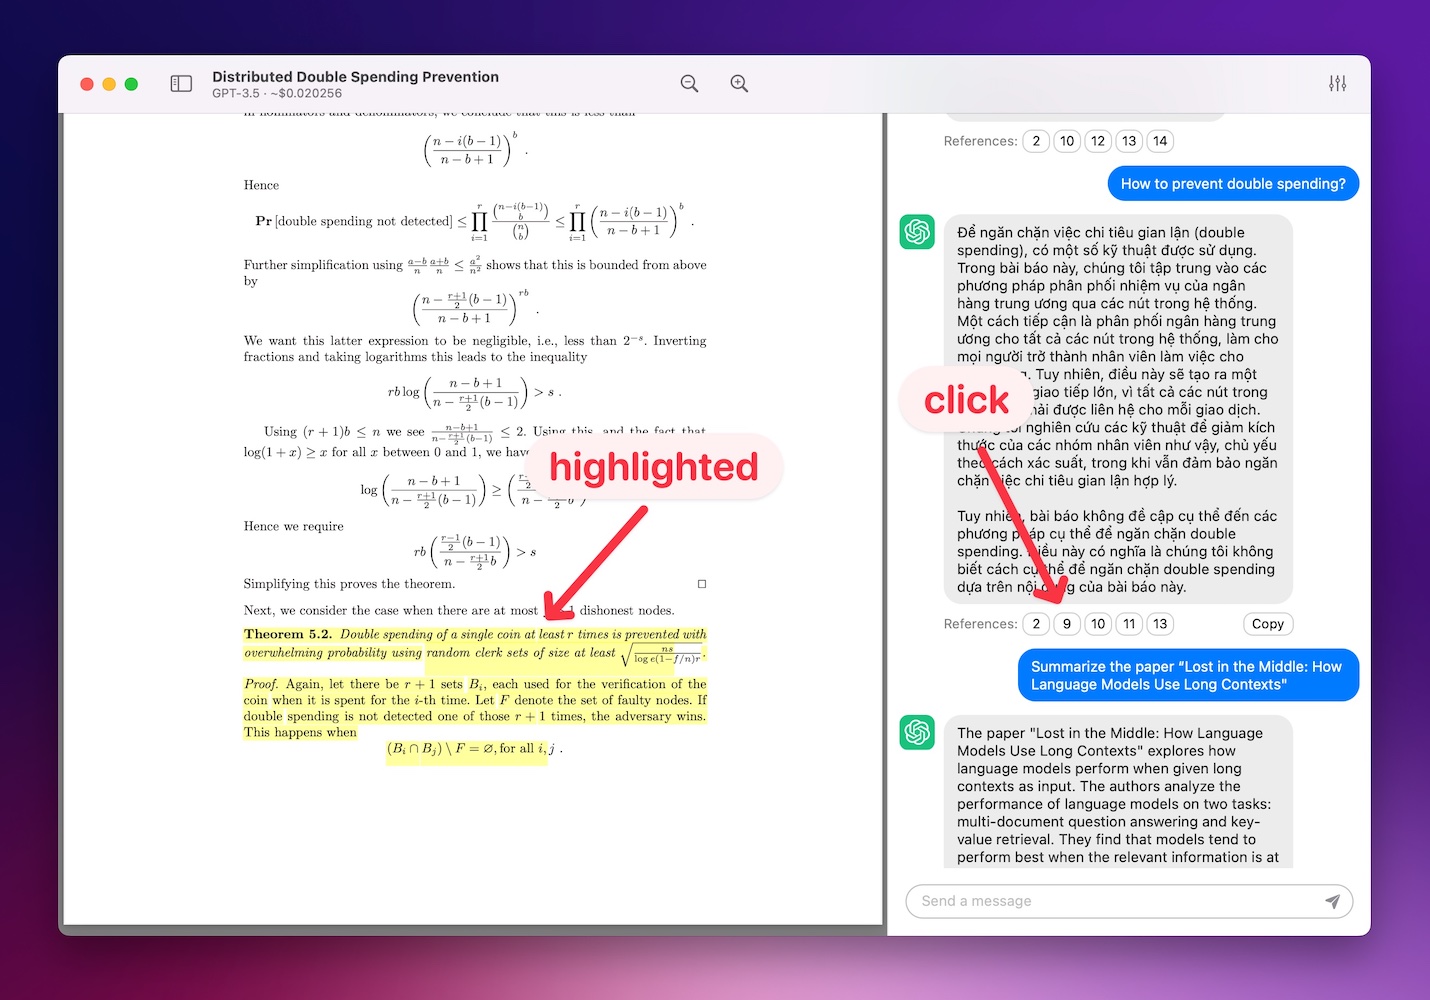 Chat with PDF, highlight relevant content